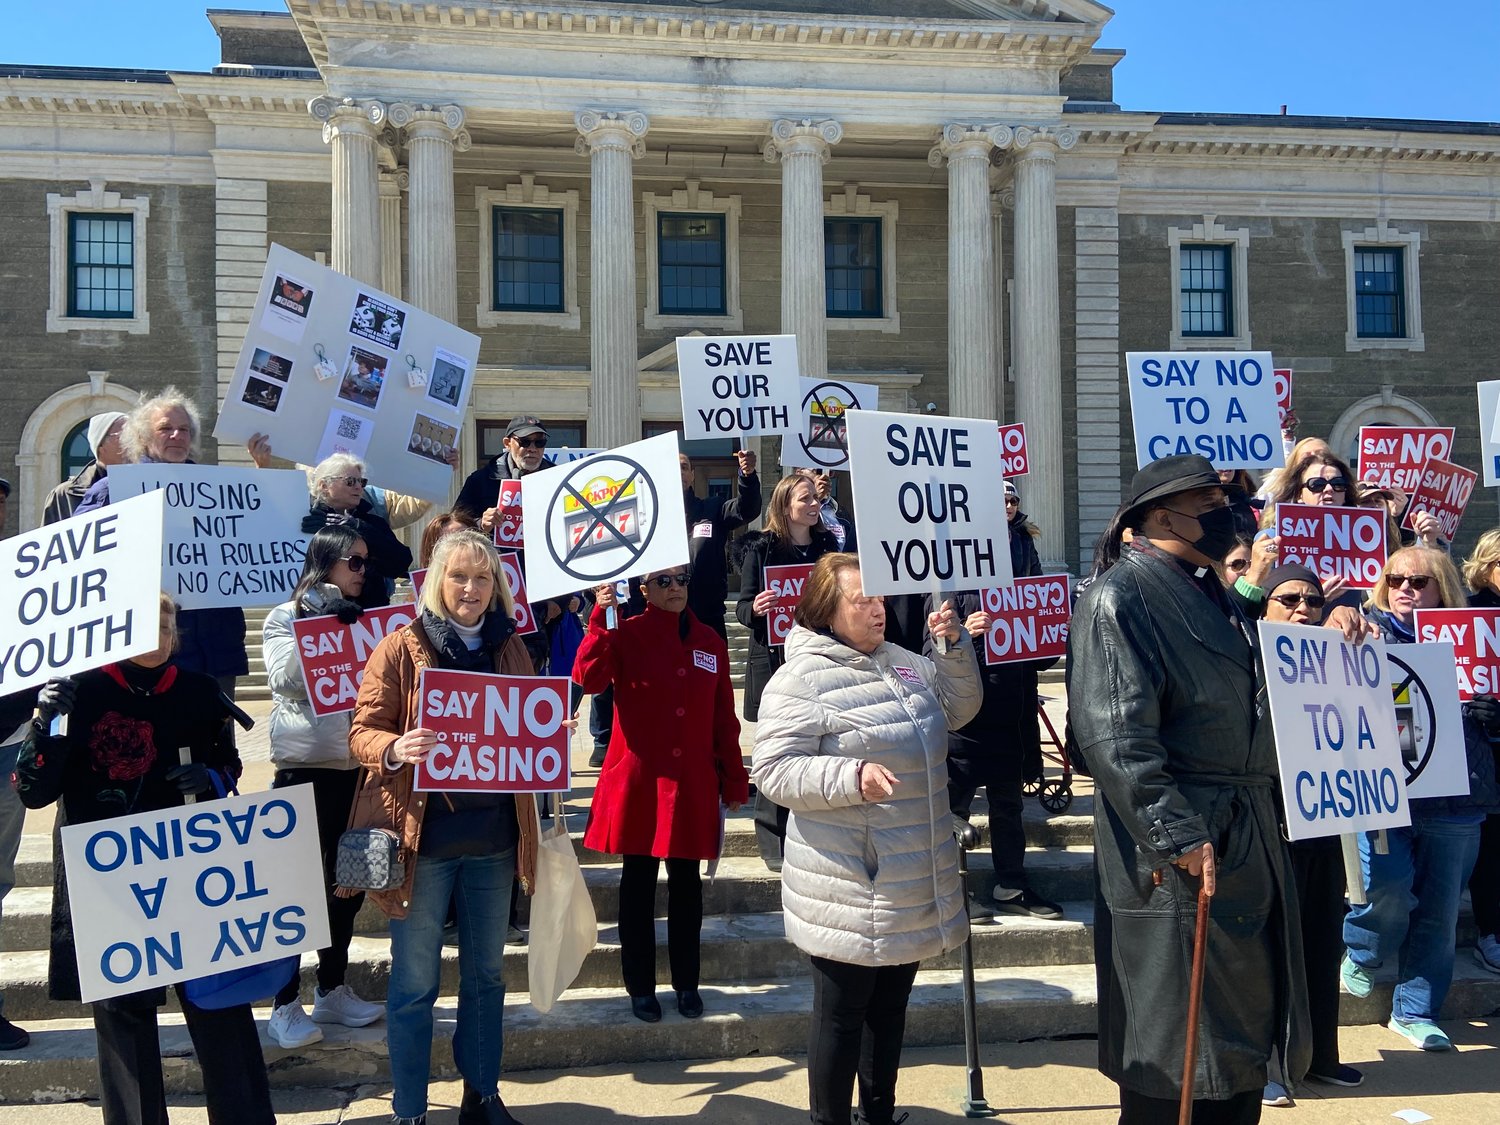 A couple dozen people rallied outside the Nassau County legislative building in Mineola Monday, calling on County Executive Bruce Blakeman and the county legislature to say ‘no’ to the proposed Las Vegas Sands casino at the Nassau Coliseum.